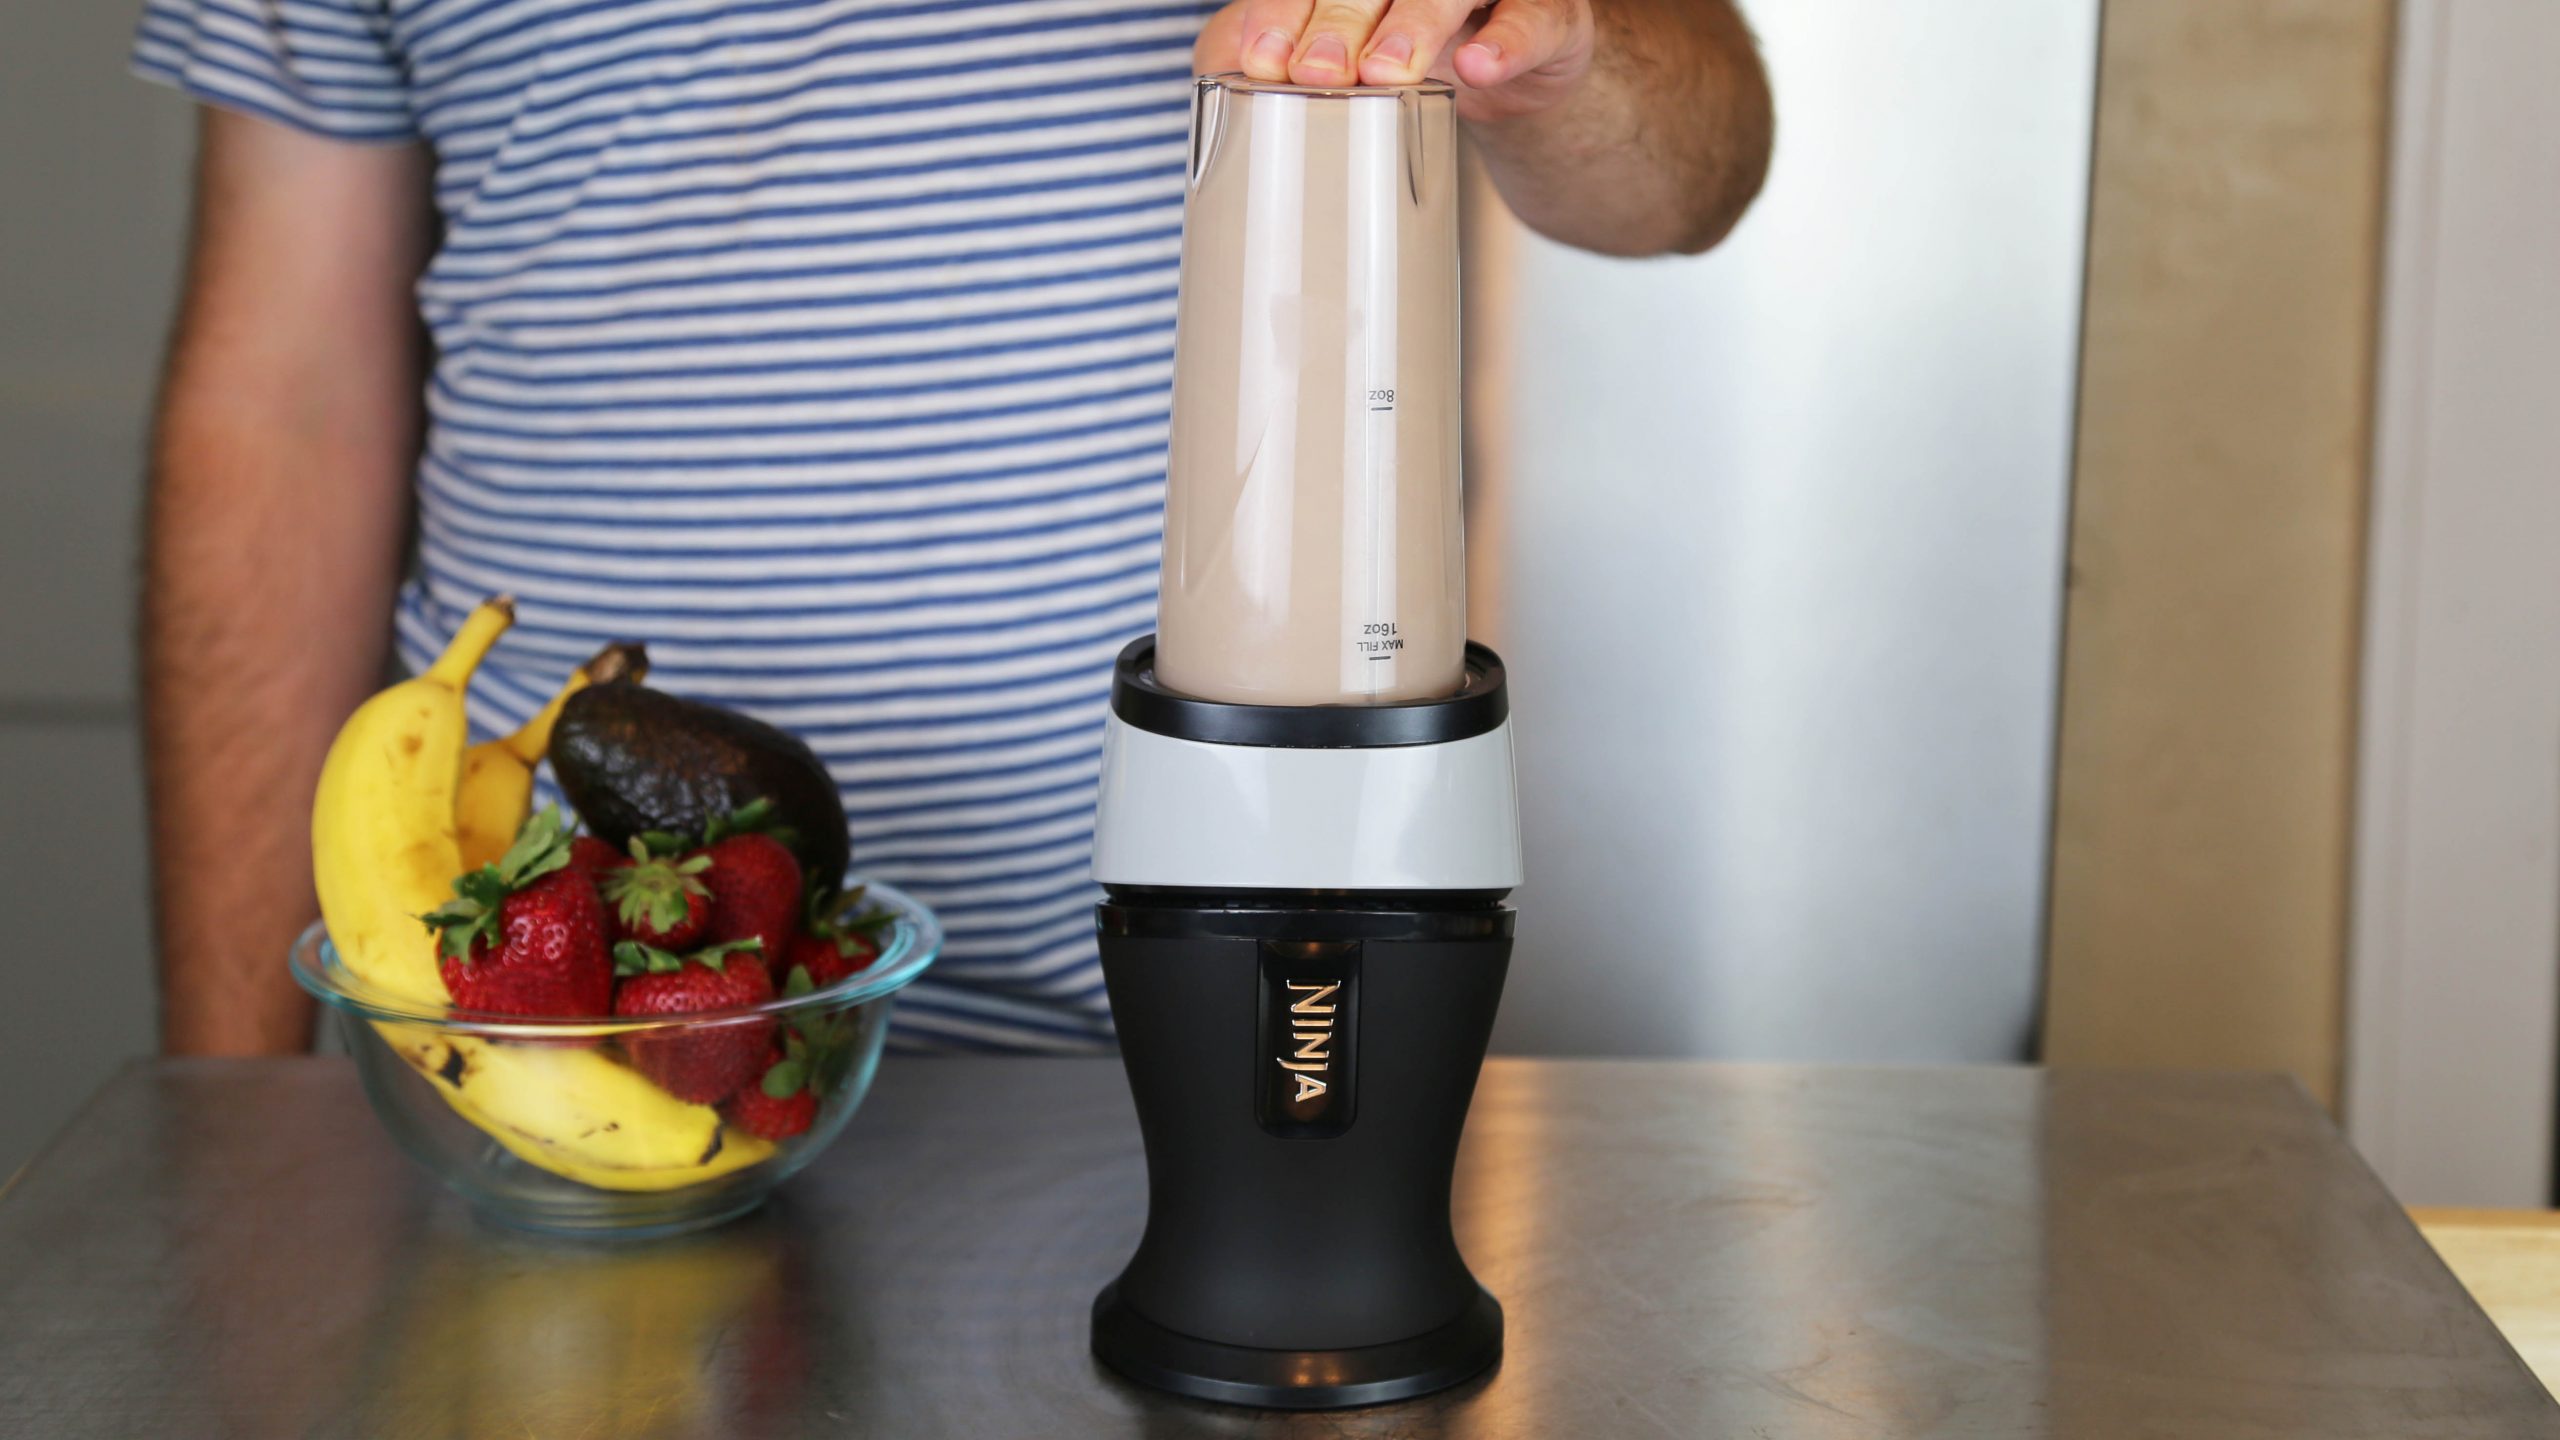 https://www.dontwasteyourmoney.com/wp-content/uploads/2022/04/blenders-for-protein-shakes-ninja-qb3001ss-to-go-cups-spout-lids-blender-for-protein-shakes-blend-review-ub-1-scaled.jpg